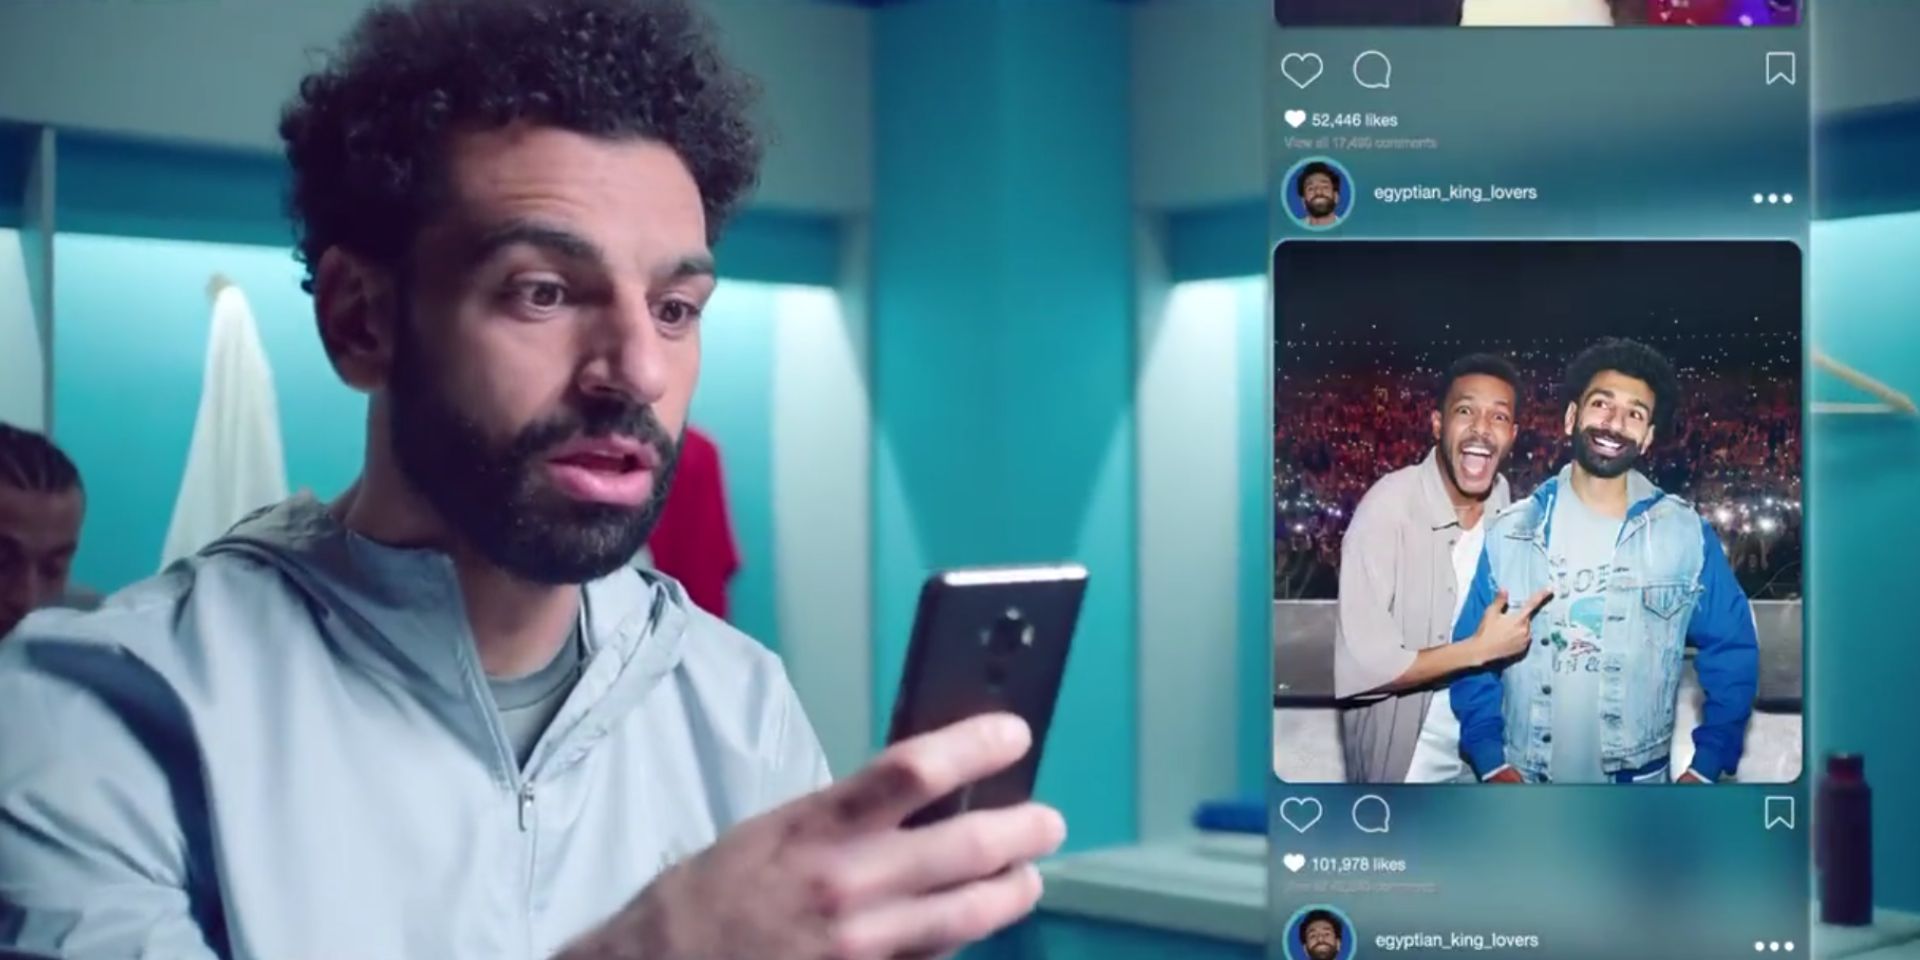 (Video) Mo Salah and his waxwork star in new Pepsi advert that showcases some new acting skills from the Egyptian